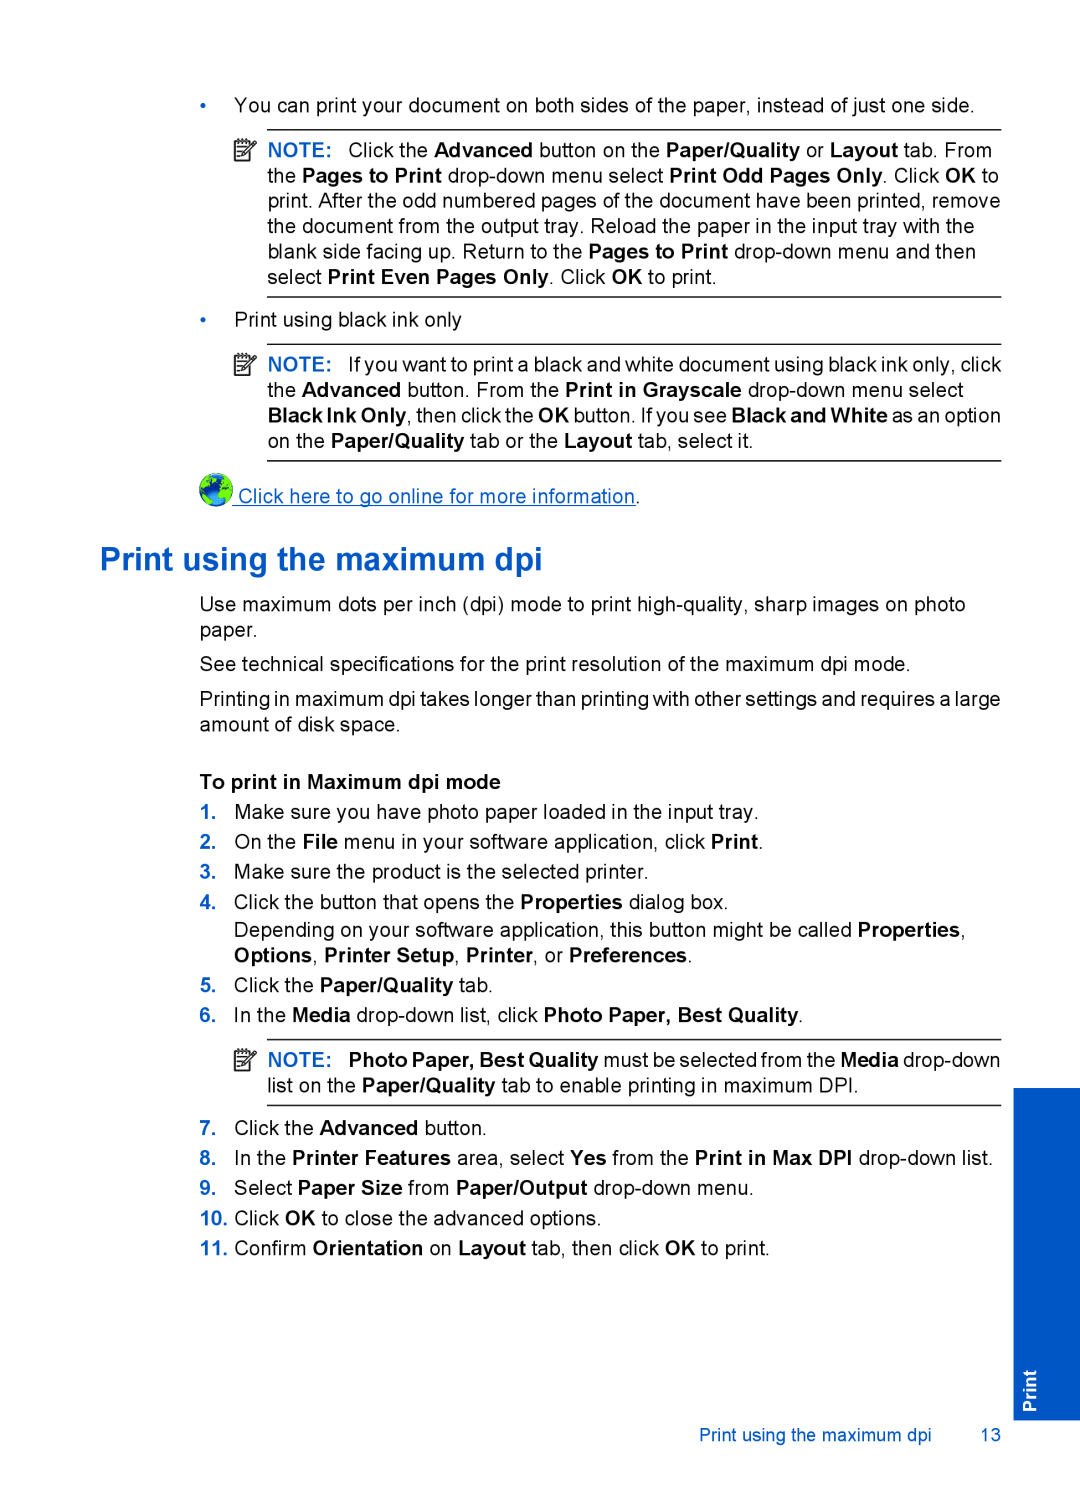 HP 1055 - J410e Print using the maximum dpi, Click here to go online for more information, To print in Maximum dpi mode 